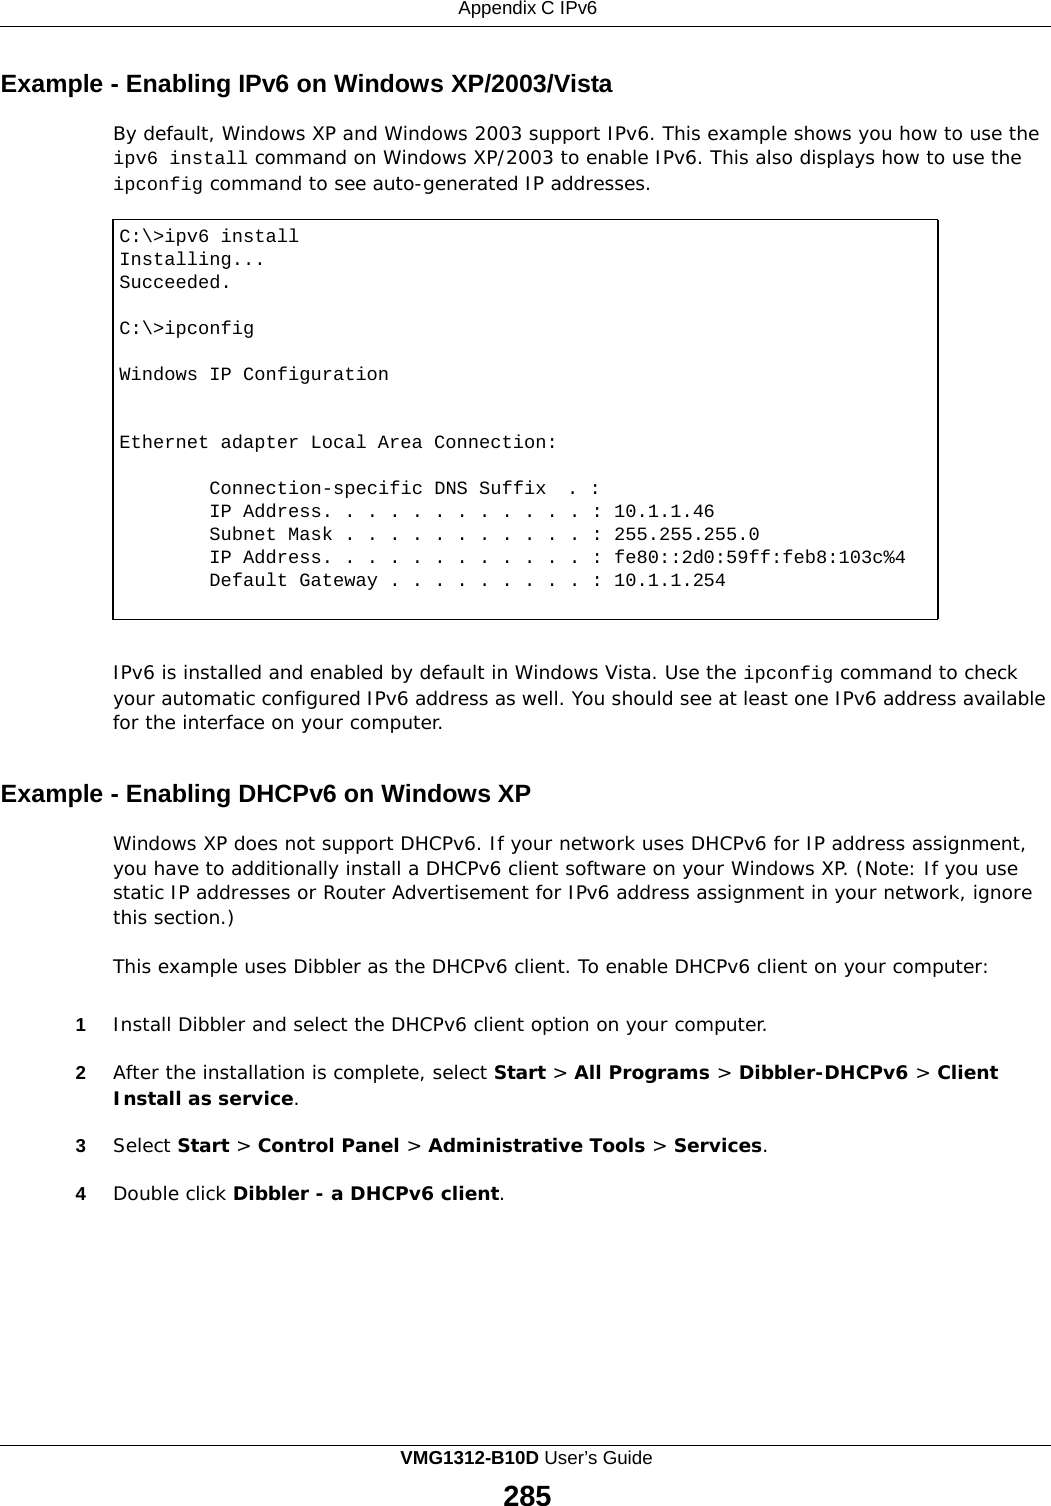 Appendix C IPv6    Example - Enabling IPv6 on Windows XP/2003/Vista  By default, Windows XP and Windows 2003 support IPv6. This example shows you how to use the ipv6 install command on Windows XP/2003 to enable IPv6. This also displays how to use the ipconfig command to see auto-generated IP addresses.  C:\&gt;ipv6 install Installing... Succeeded.  C:\&gt;ipconfig  Windows IP Configuration  Ethernet adapter Local Area Connection: Connection-specific DNS Suffix  . : IP Address. . . . . . . . . . . . : 10.1.1.46 Subnet Mask . . . . . . . . . . . : 255.255.255.0 IP Address. . . . . . . . . . . . : fe80::2d0:59ff:feb8:103c%4 Default Gateway . . . . . . . . . : 10.1.1.254    IPv6 is installed and enabled by default in Windows Vista. Use the ipconfig command to check your automatic configured IPv6 address as well. You should see at least one IPv6 address available for the interface on your computer.   Example - Enabling DHCPv6 on Windows XP  Windows XP does not support DHCPv6. If your network uses DHCPv6 for IP address assignment, you have to additionally install a DHCPv6 client software on your Windows XP. (Note: If you use static IP addresses or Router Advertisement for IPv6 address assignment in your network, ignore this section.)  This example uses Dibbler as the DHCPv6 client. To enable DHCPv6 client on your computer:   1  Install Dibbler and select the DHCPv6 client option on your computer.  2  After the installation is complete, select Start &gt; All Programs &gt; Dibbler-DHCPv6 &gt; Client Install as service.  3  Select Start &gt; Control Panel &gt; Administrative Tools &gt; Services.  4  Double click Dibbler - a DHCPv6 client. VMG1312-B10D User’s Guide 285  